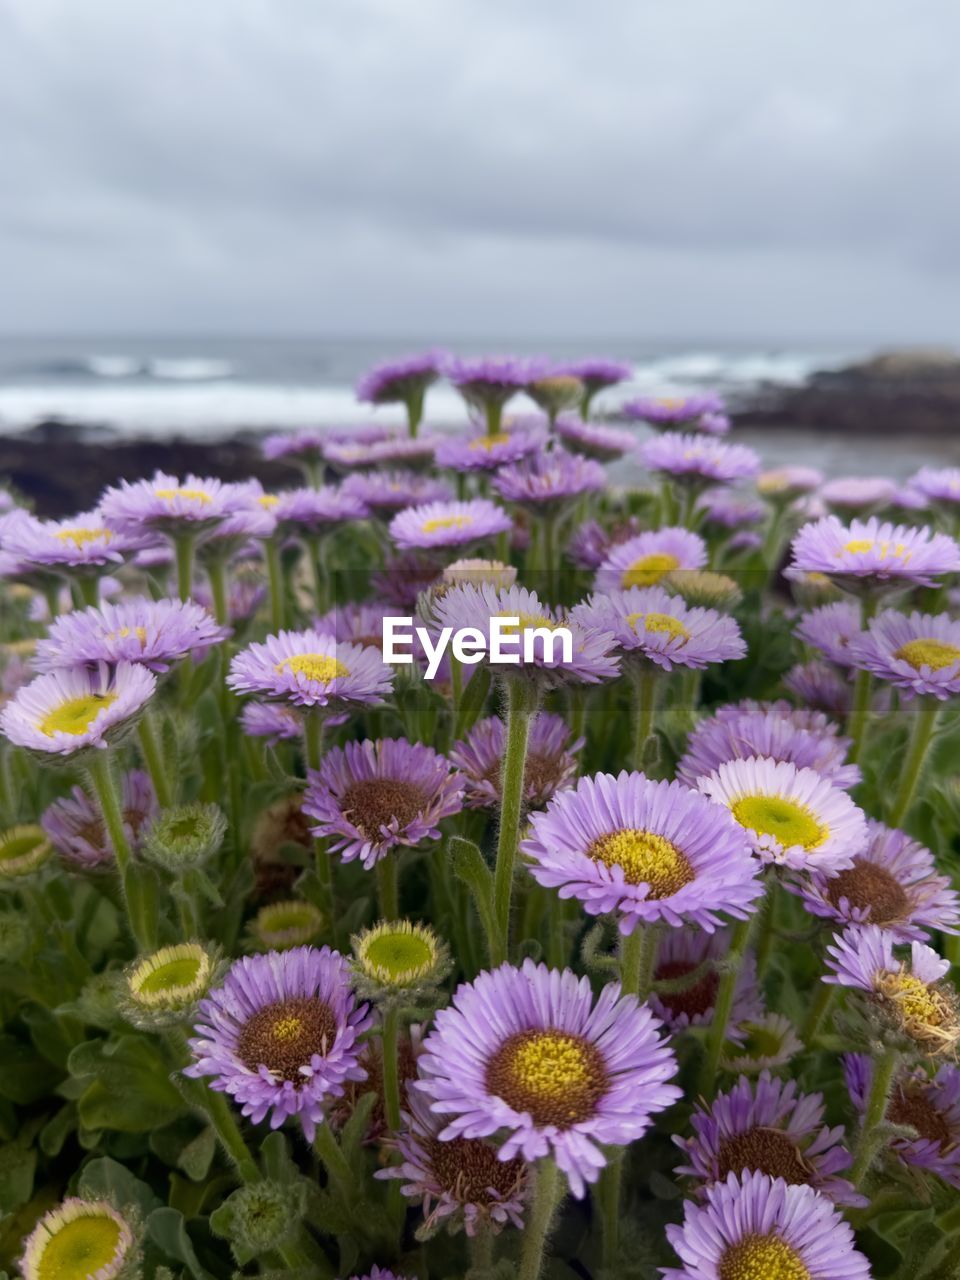 flower, flowering plant, plant, beauty in nature, freshness, nature, sky, cloud, fragility, land, growth, water, flower head, field, no people, close-up, sea, inflorescence, petal, meadow, wildflower, focus on foreground, daisy, scenics - nature, purple, environment, horizon, day, outdoors, landscape, overcast, tranquility, springtime, beach, botany, travel destinations, blossom, multi colored